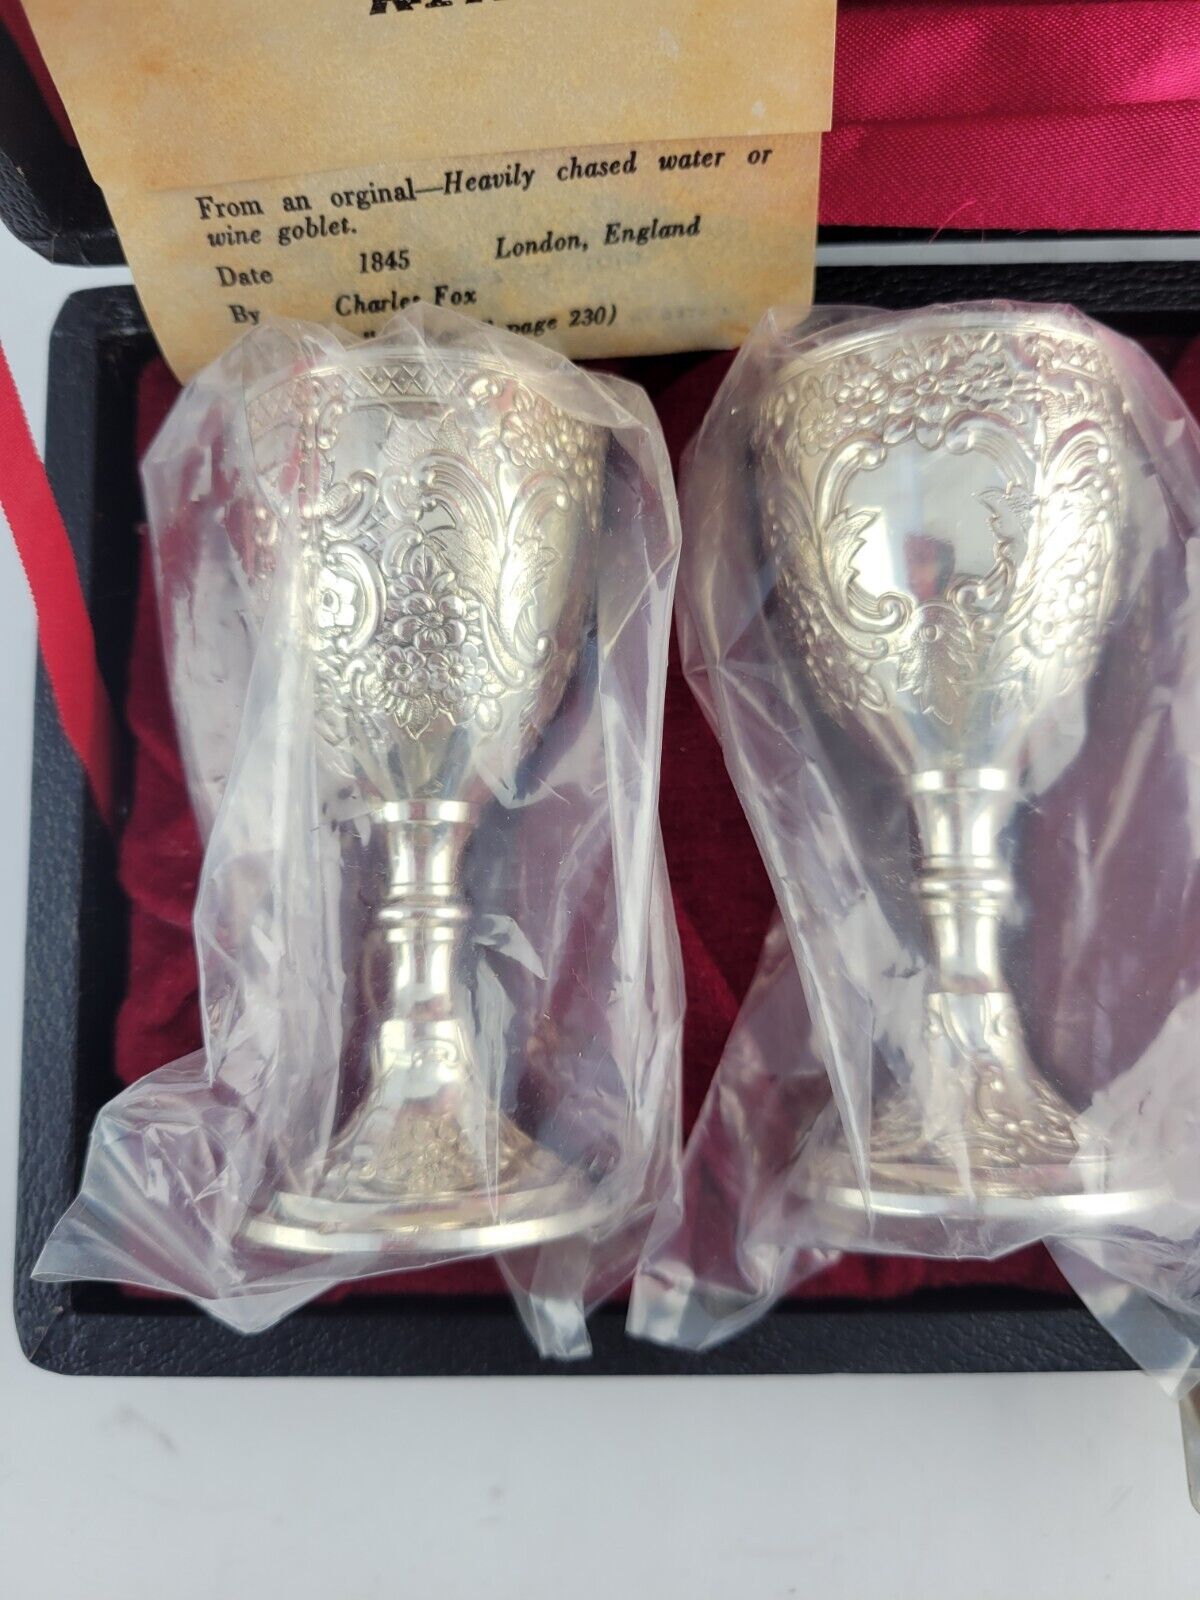 Regal Reproductions Set Of 4 Silver Plated Mini Wine Goblets Boxed Corbell